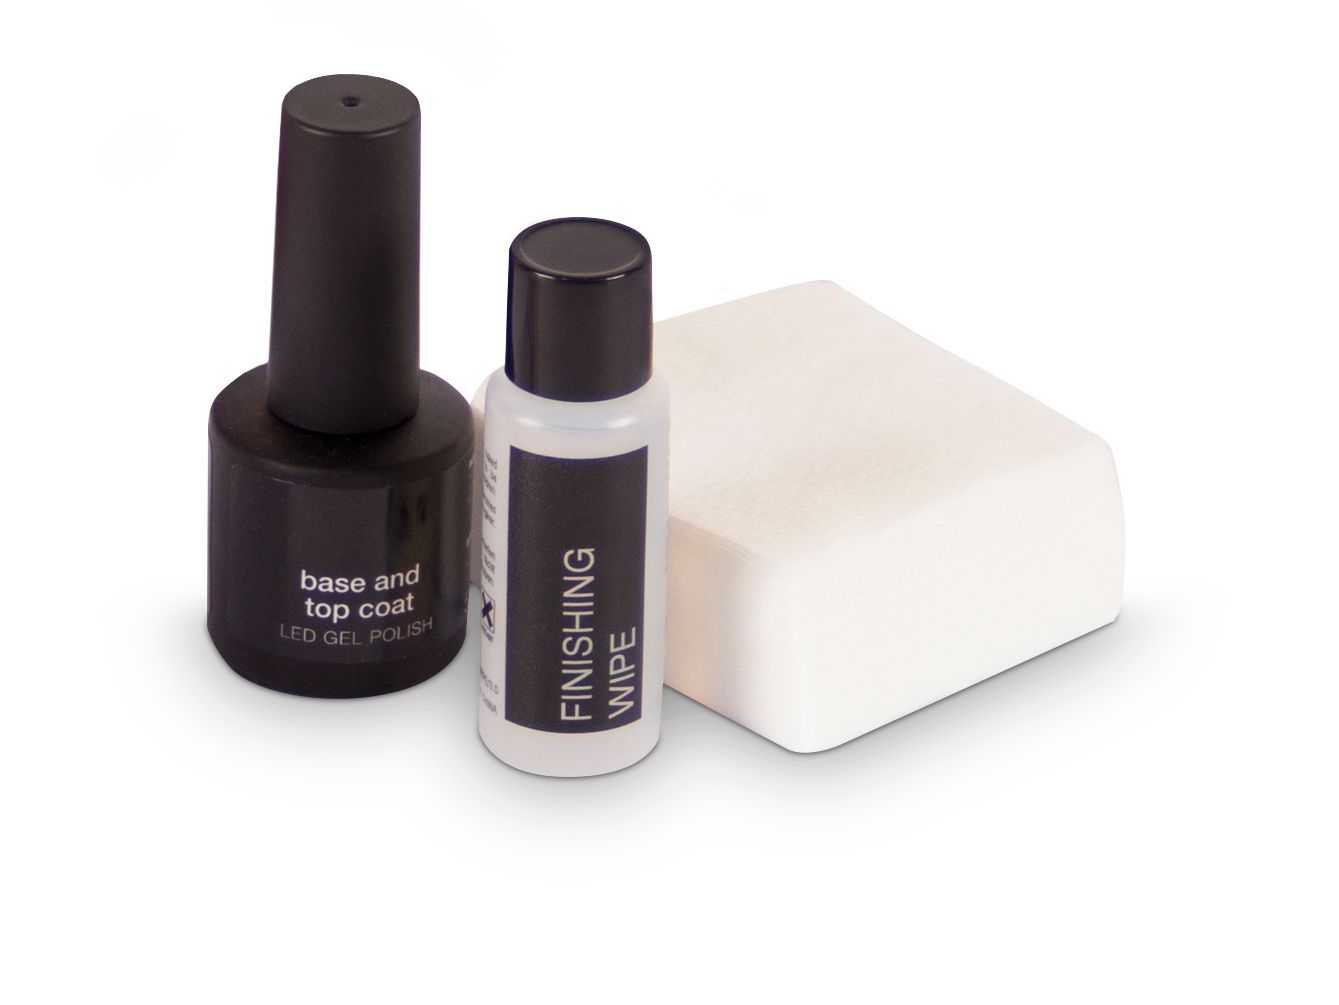 base and top coat, finishing wipe and lint free wipes